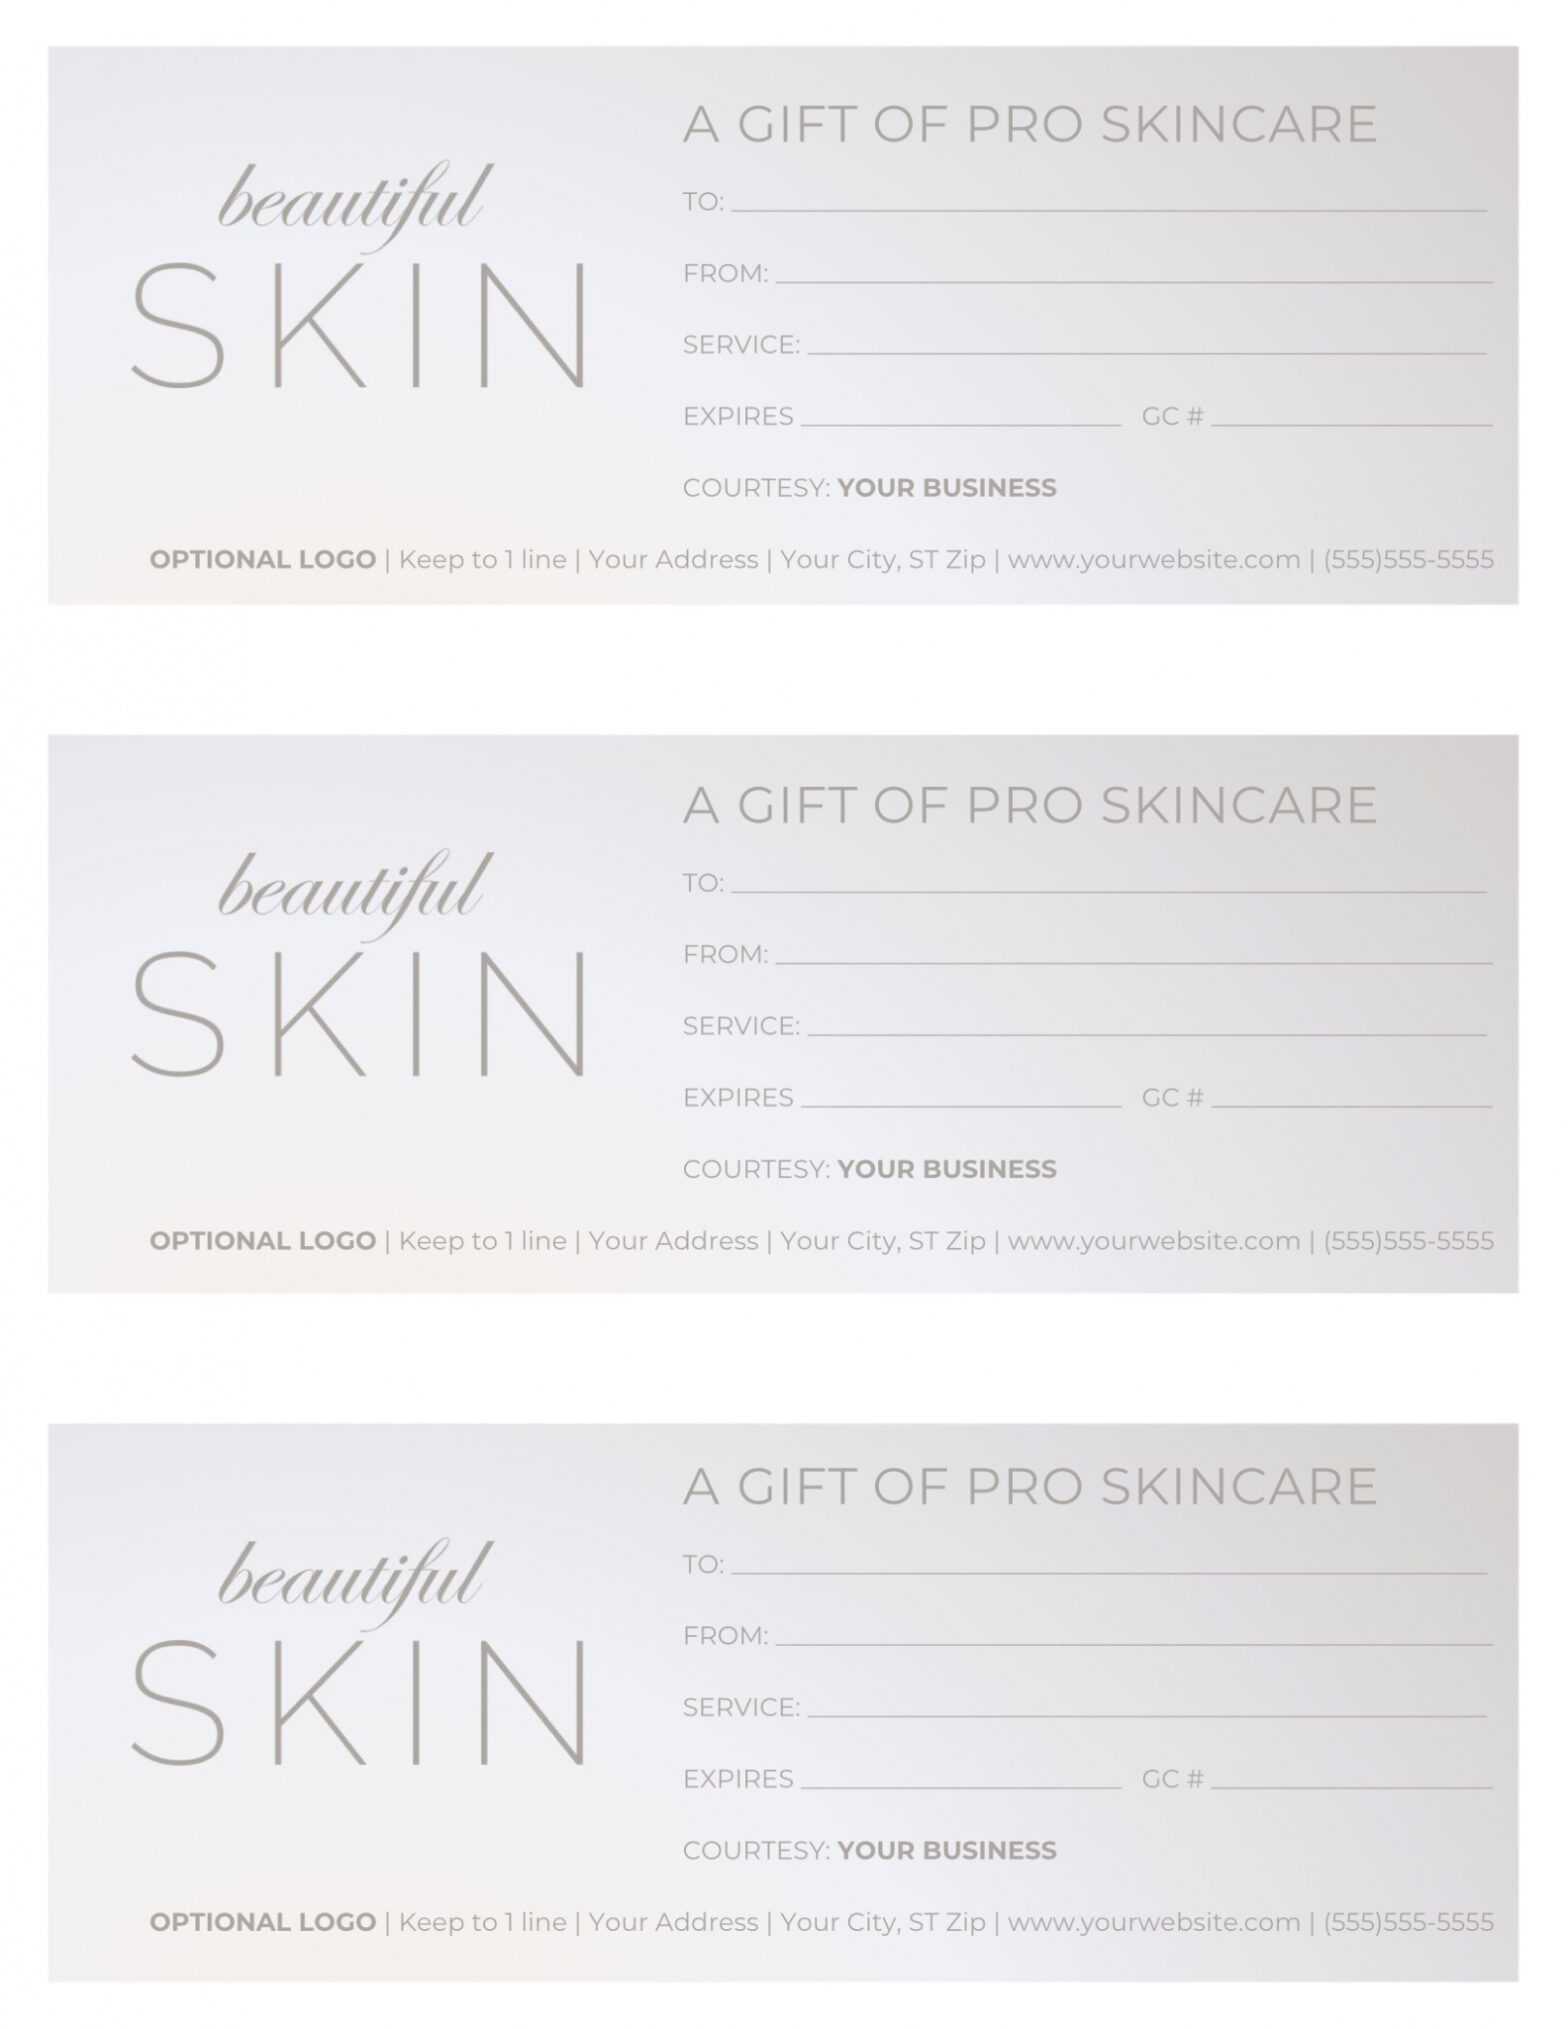 Free Gift Certificate Templates For Massage And Spa with Spa Day Gift Certificate Template